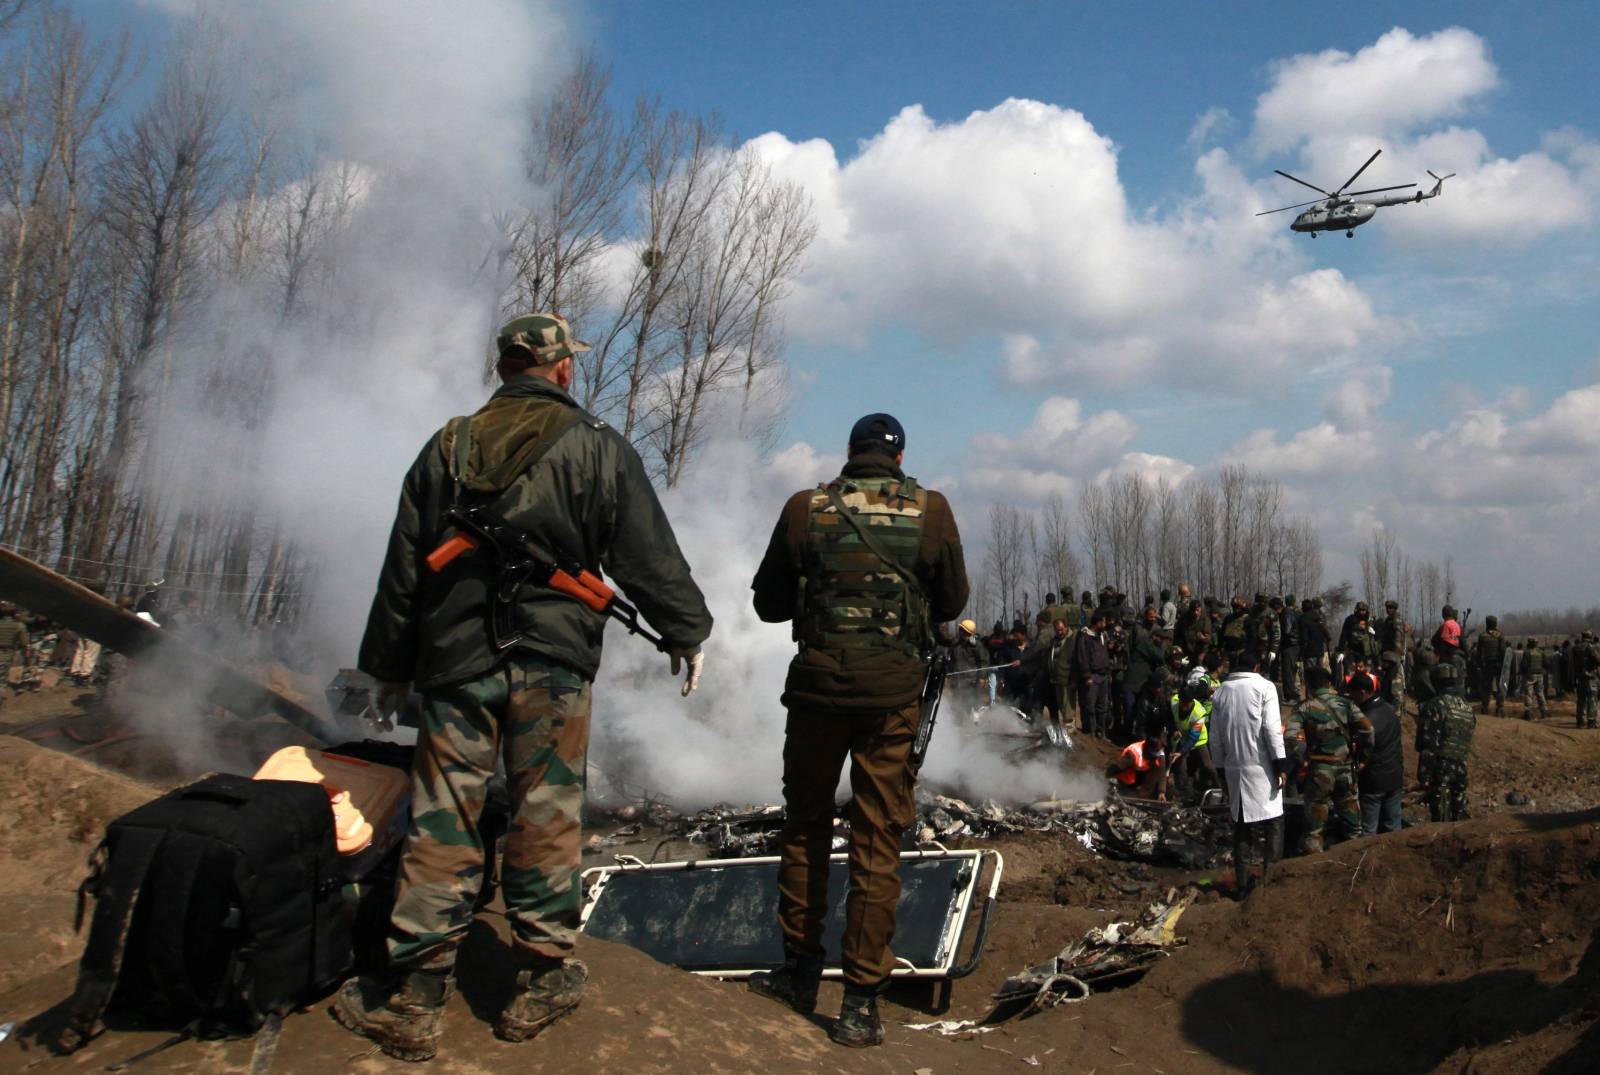 Indian soldiers stand next to the wreckage of Indian Air Force's helicopter after it crashed in Budgam